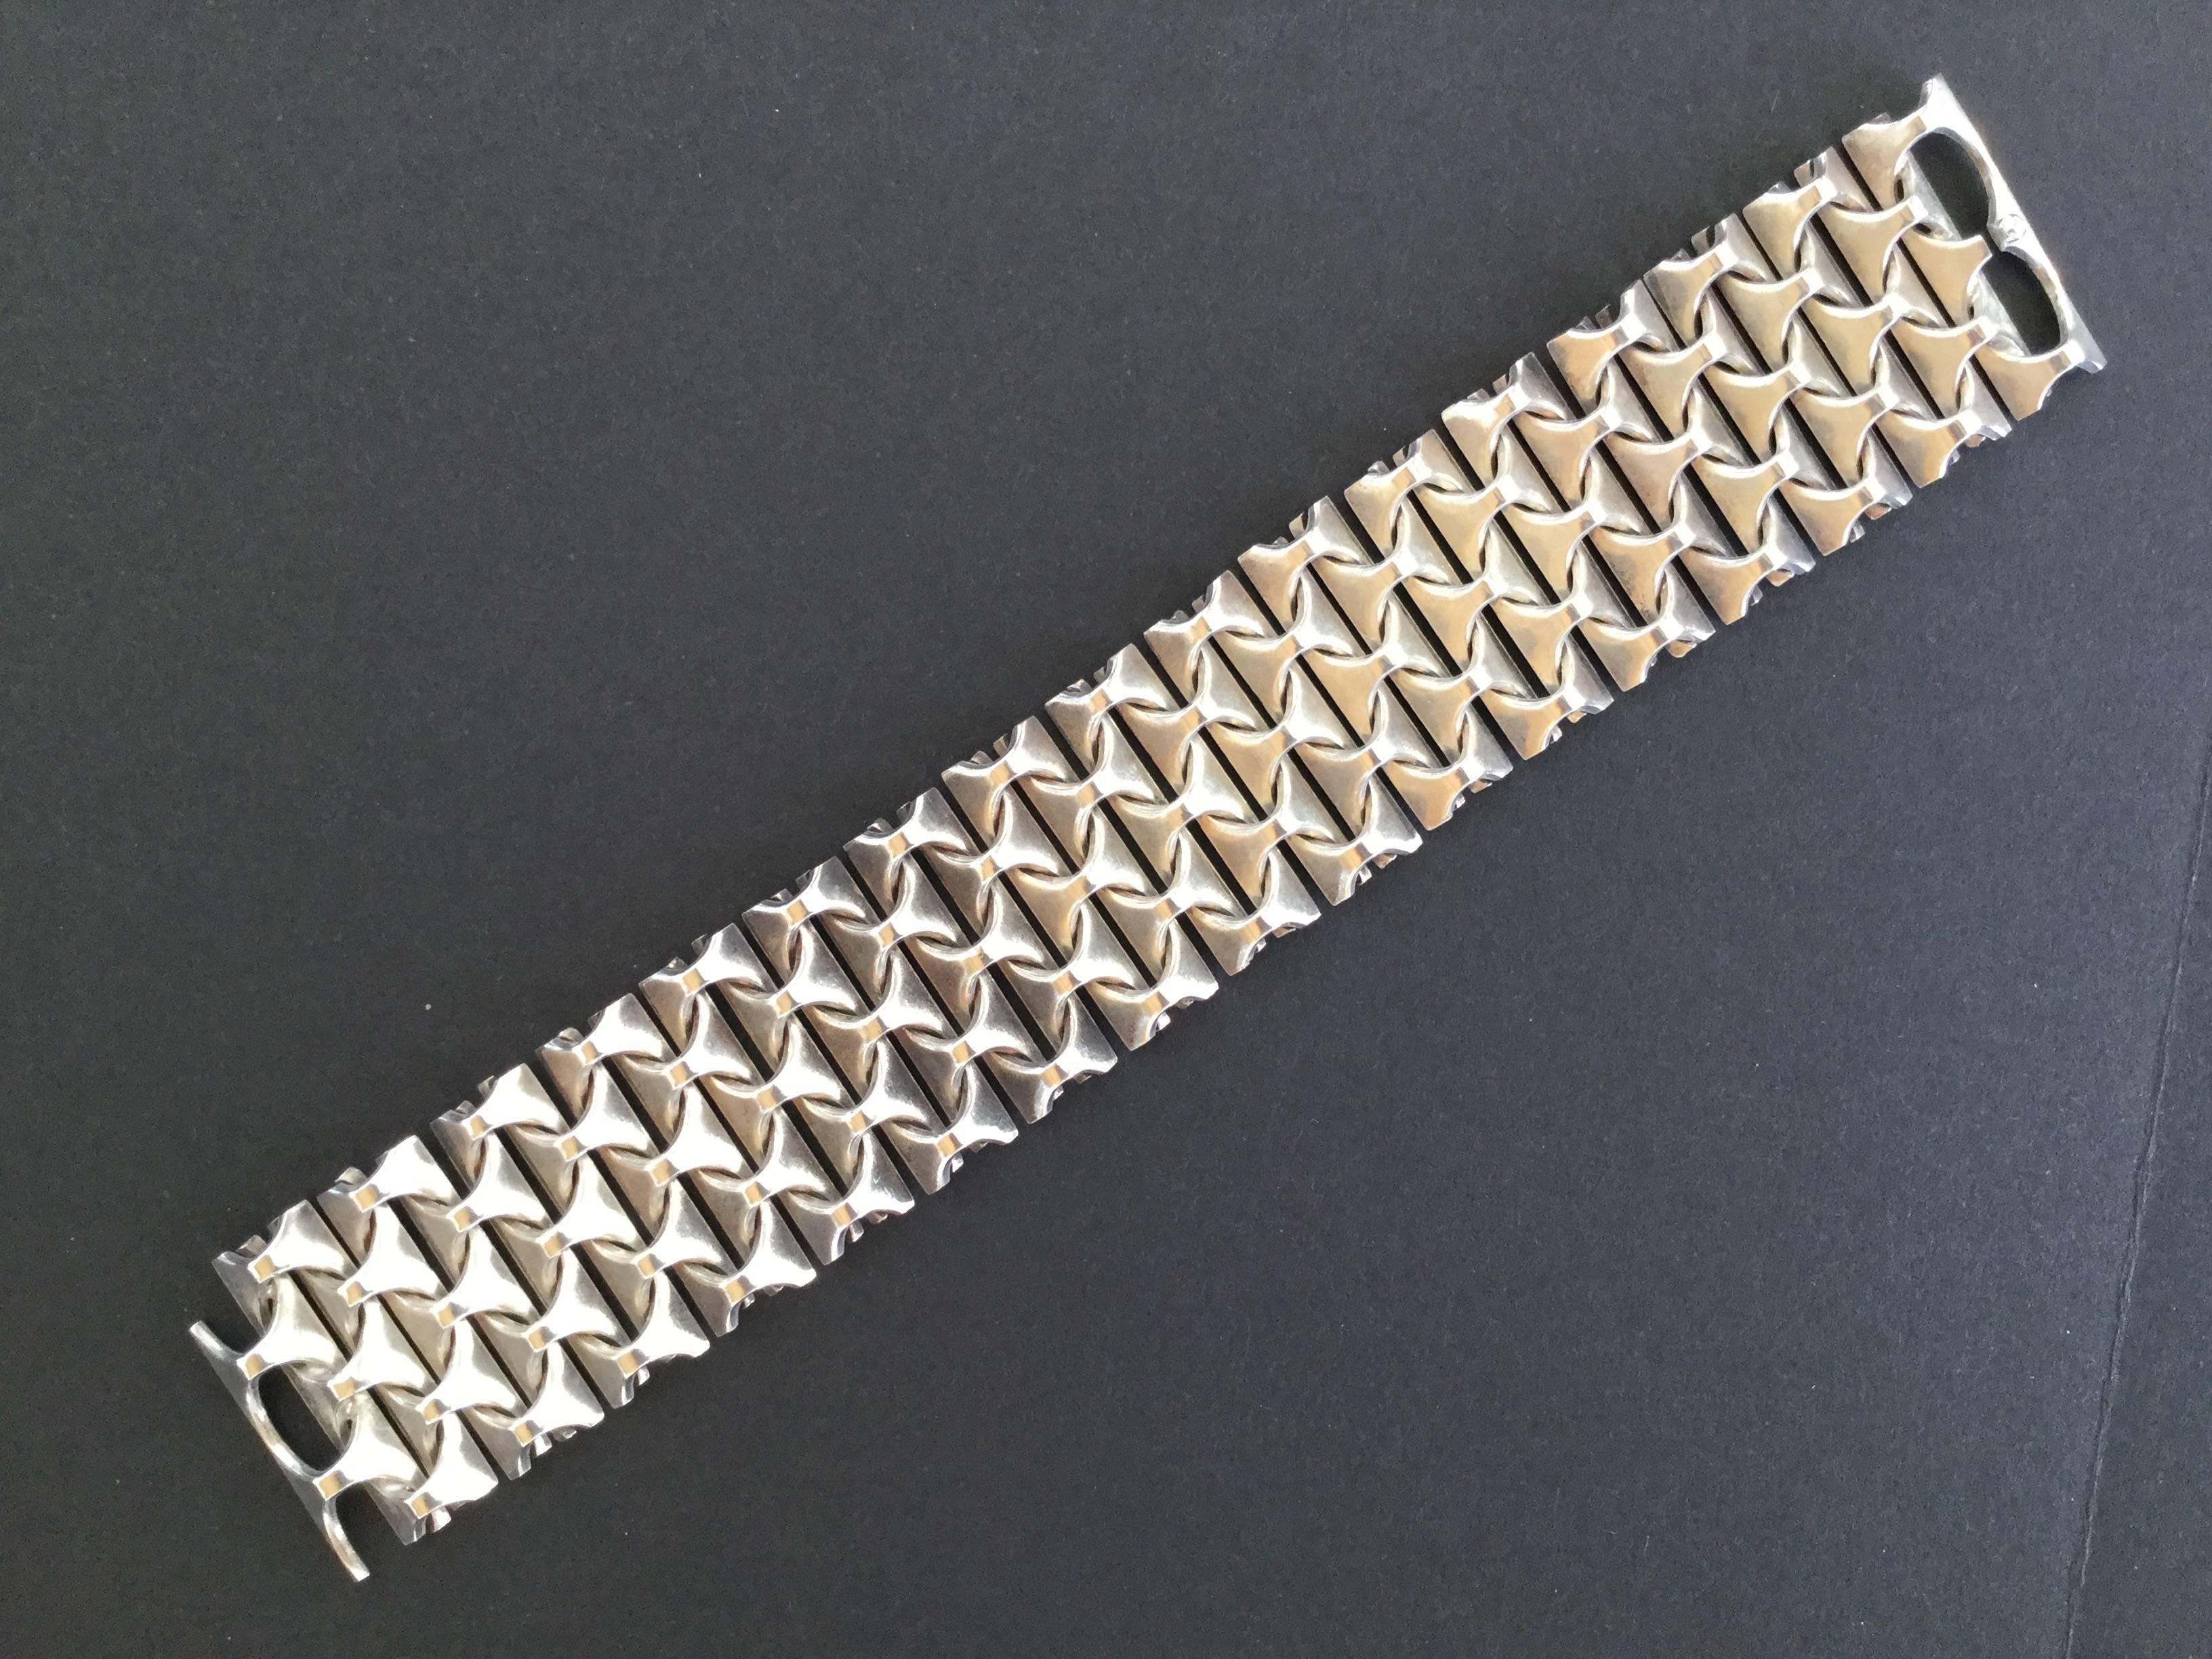 High impact 1970's silver bracelet by Swedish designer Rey Urban for Danish firm Age Fausing. An absolutely iconic example of vintage Scandinavian Modernism. This truly monumental piece takes the form of many polished interlocking links that are